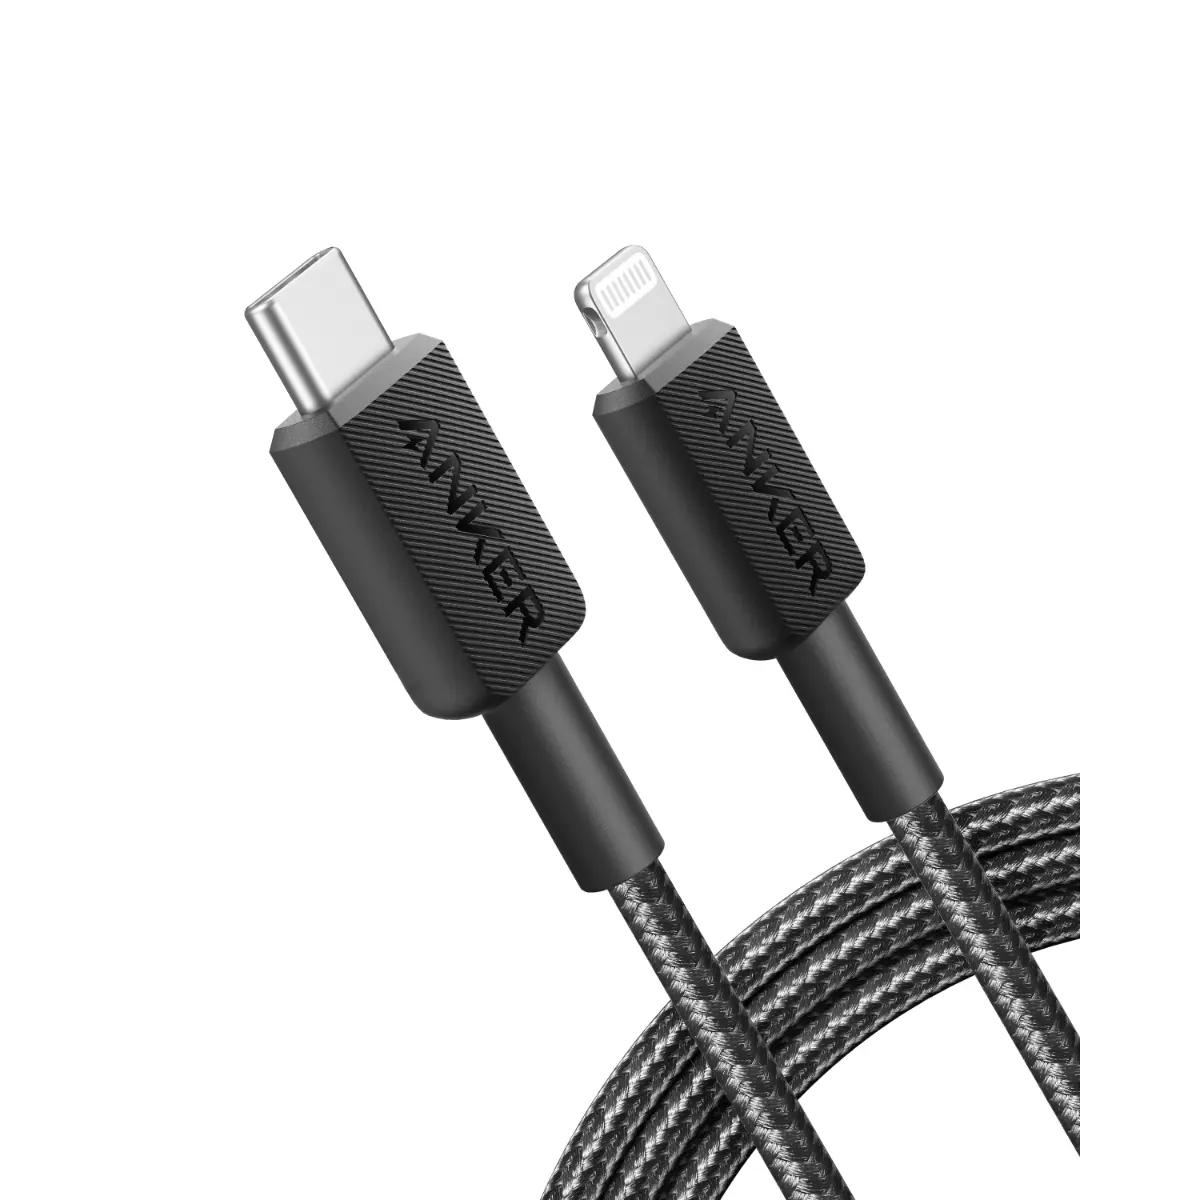 Anker 322 USB-C to Lightning Cable (6ft Braided) - Black